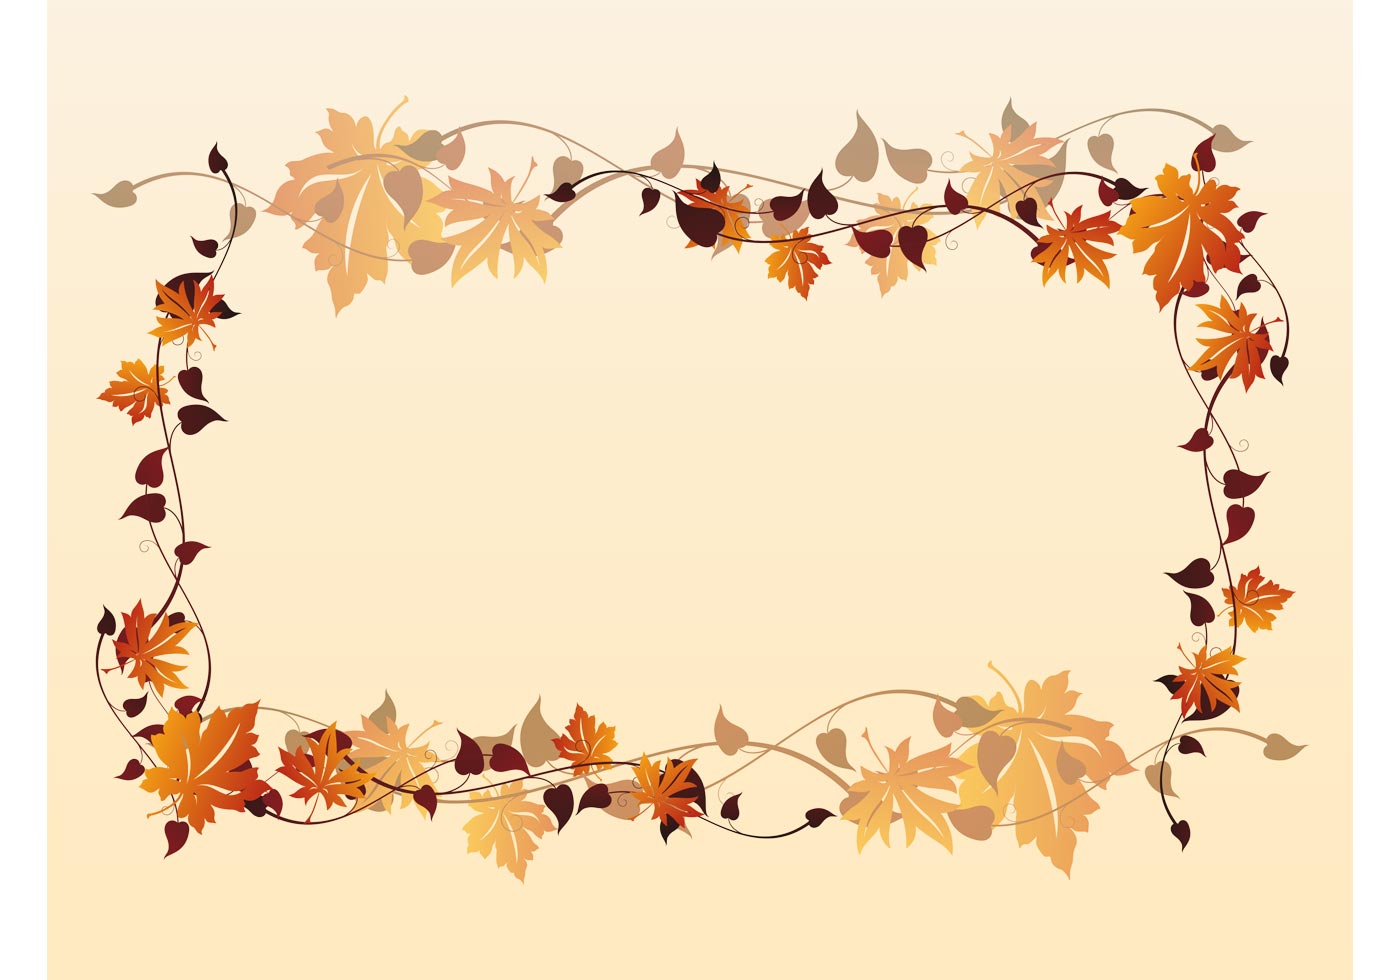 Download Fall Leaves Border Free Vector Art - (6777 Free Downloads)